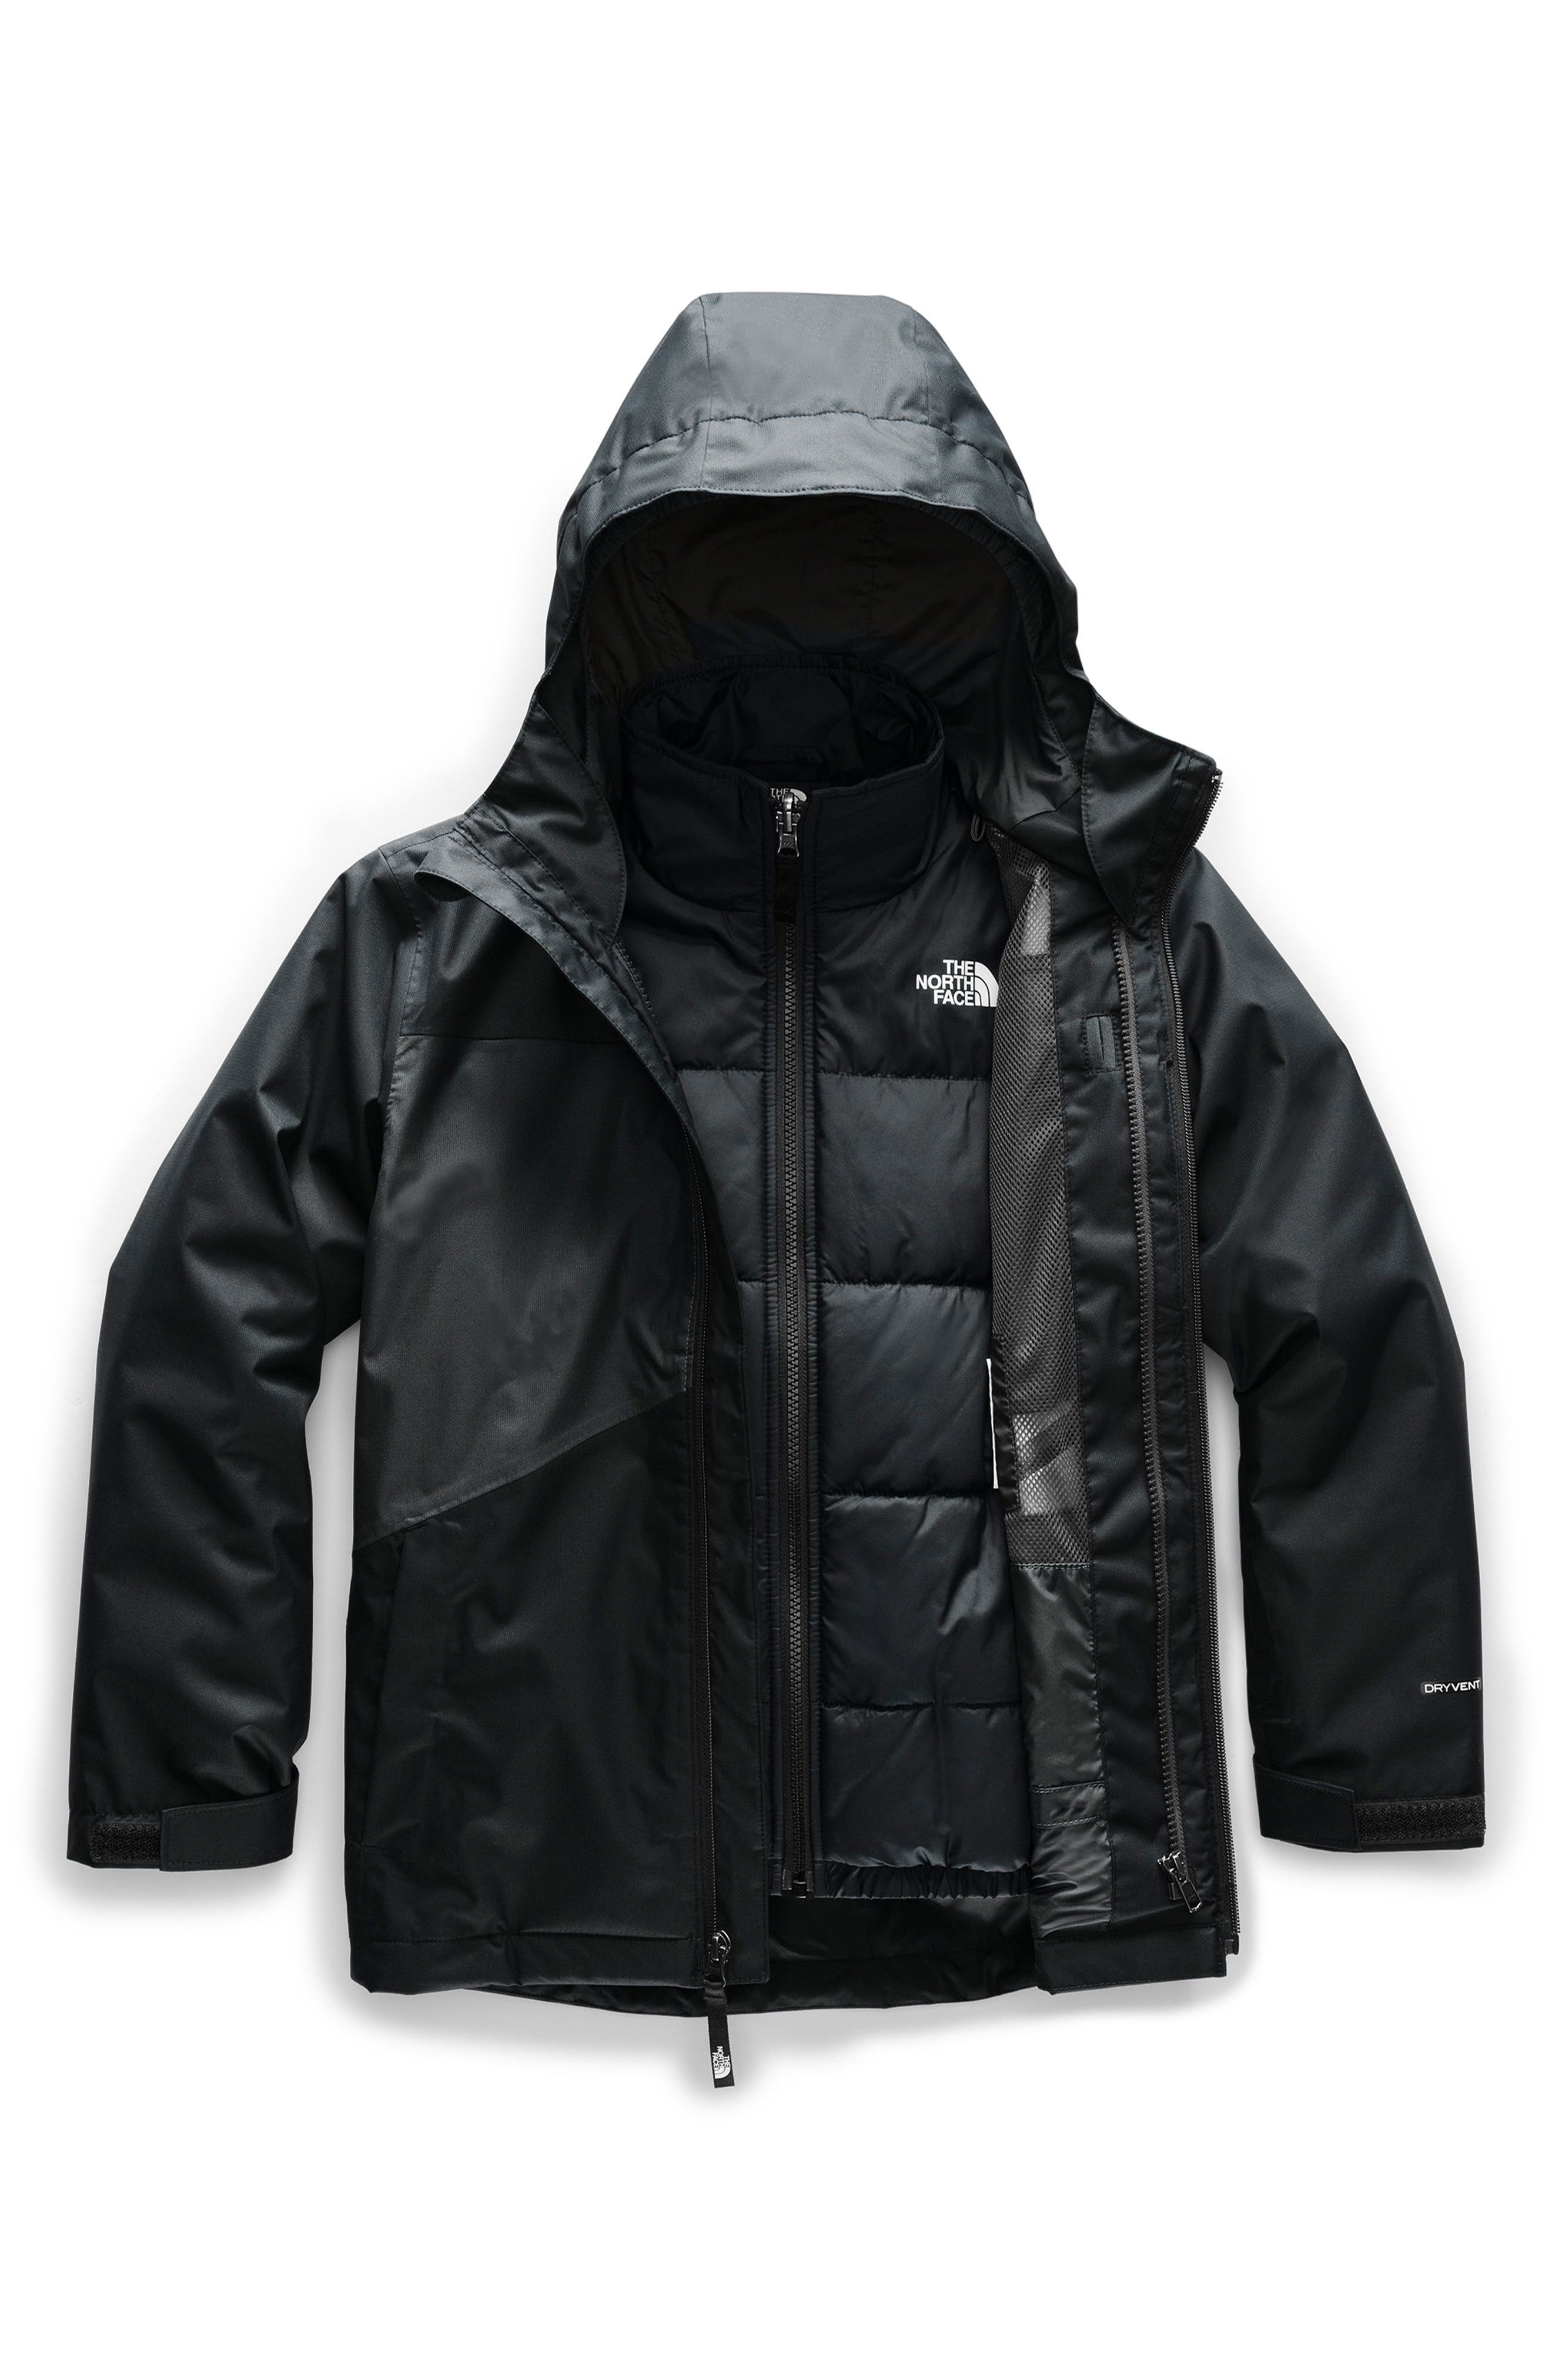 north face 3 in 1 jacket 